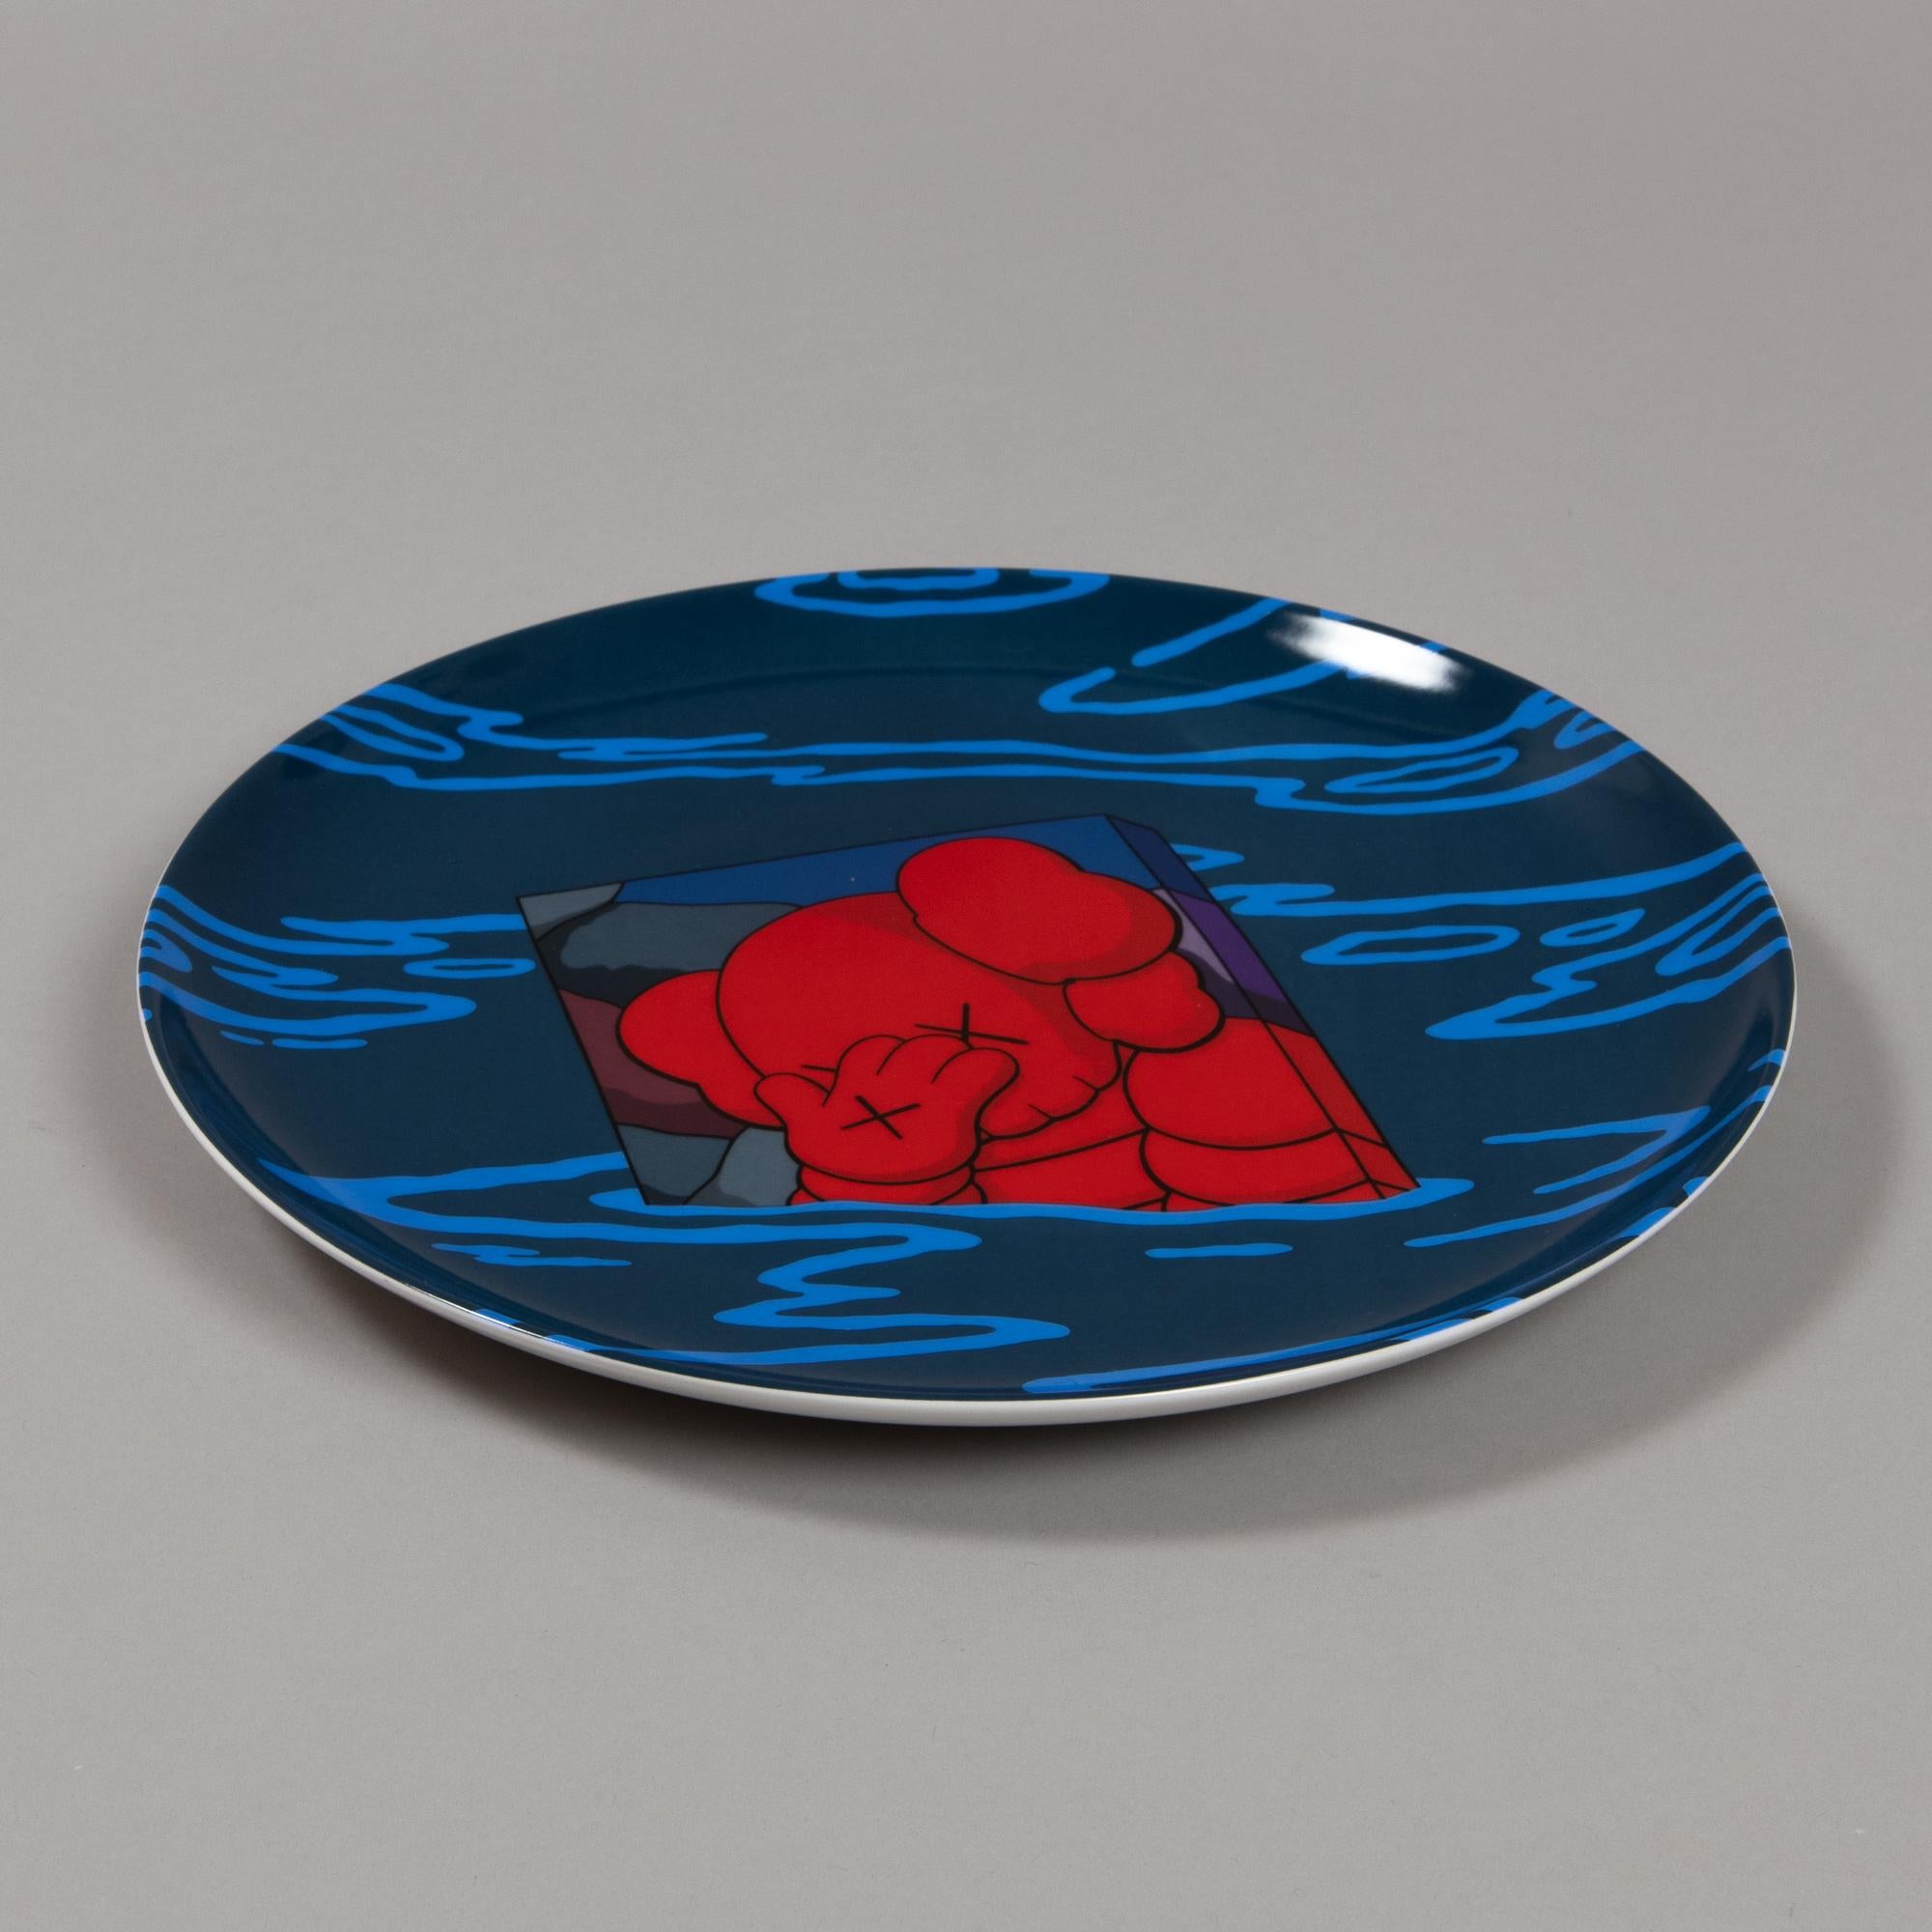 KAWS, Hours, Nights, Weeks, Months - Limited Edition Plate, Street Art For Sale 4